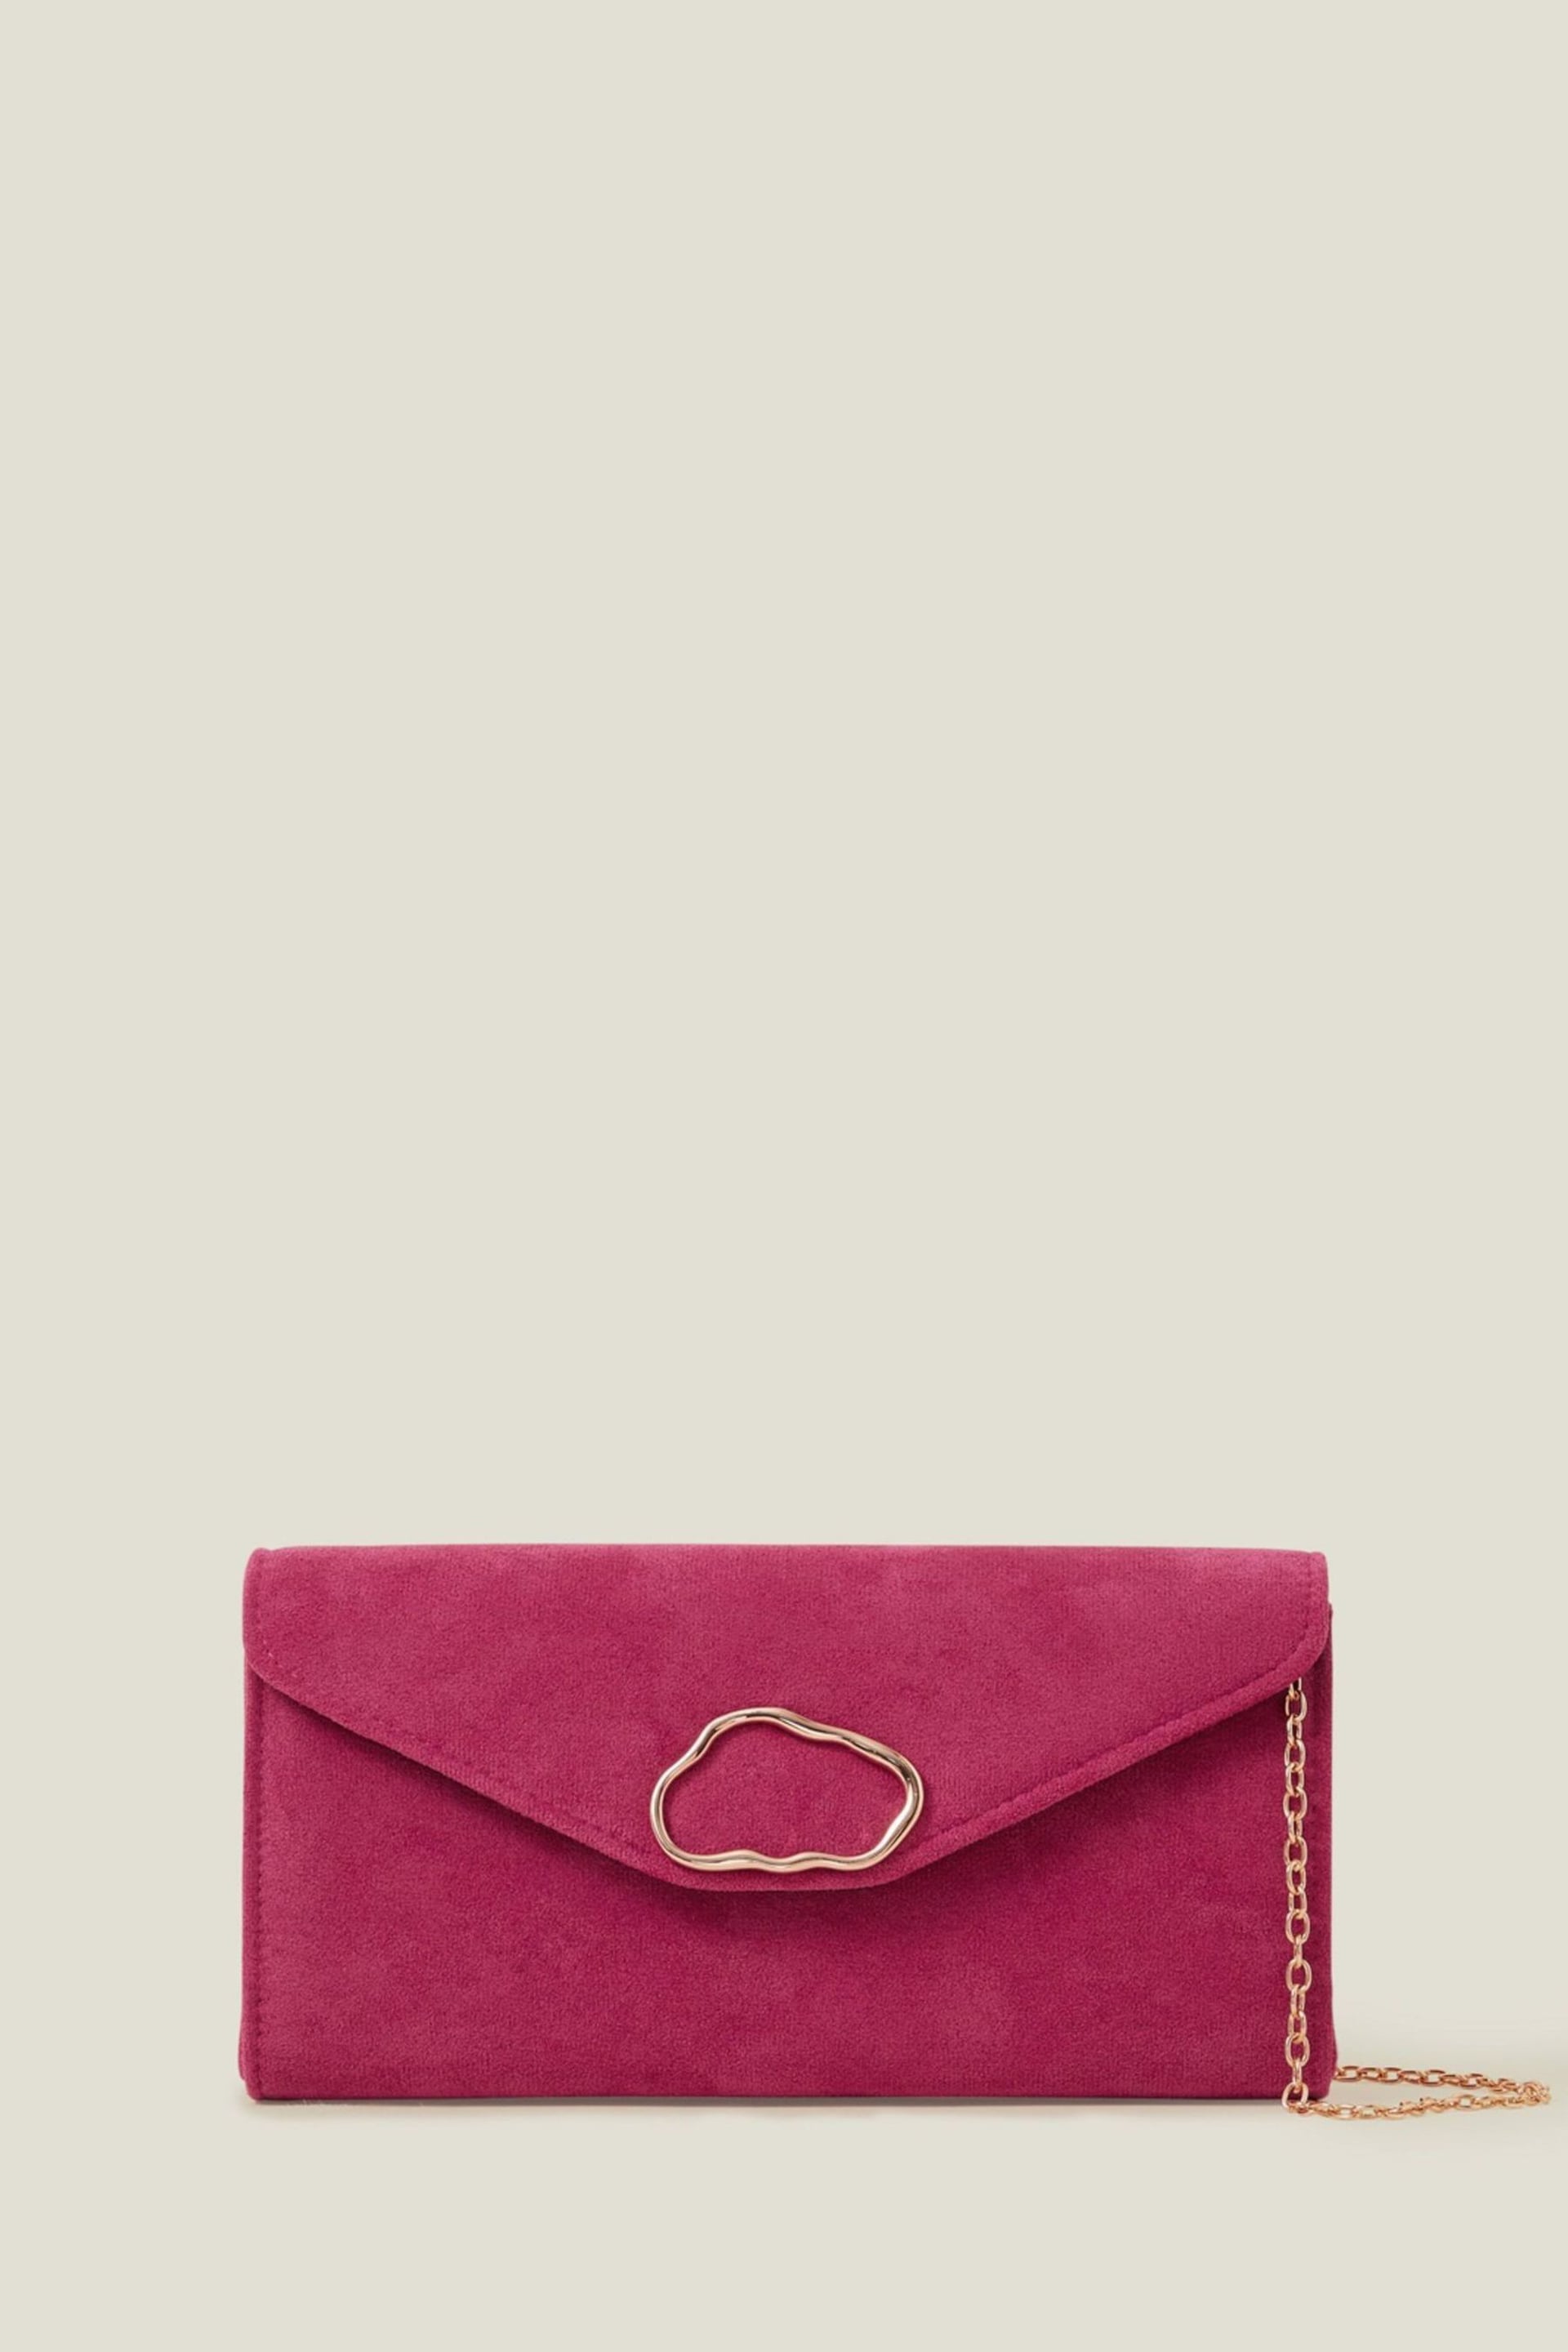 Accessorize Pink Suedette Box Clutch Bag - Image 2 of 4